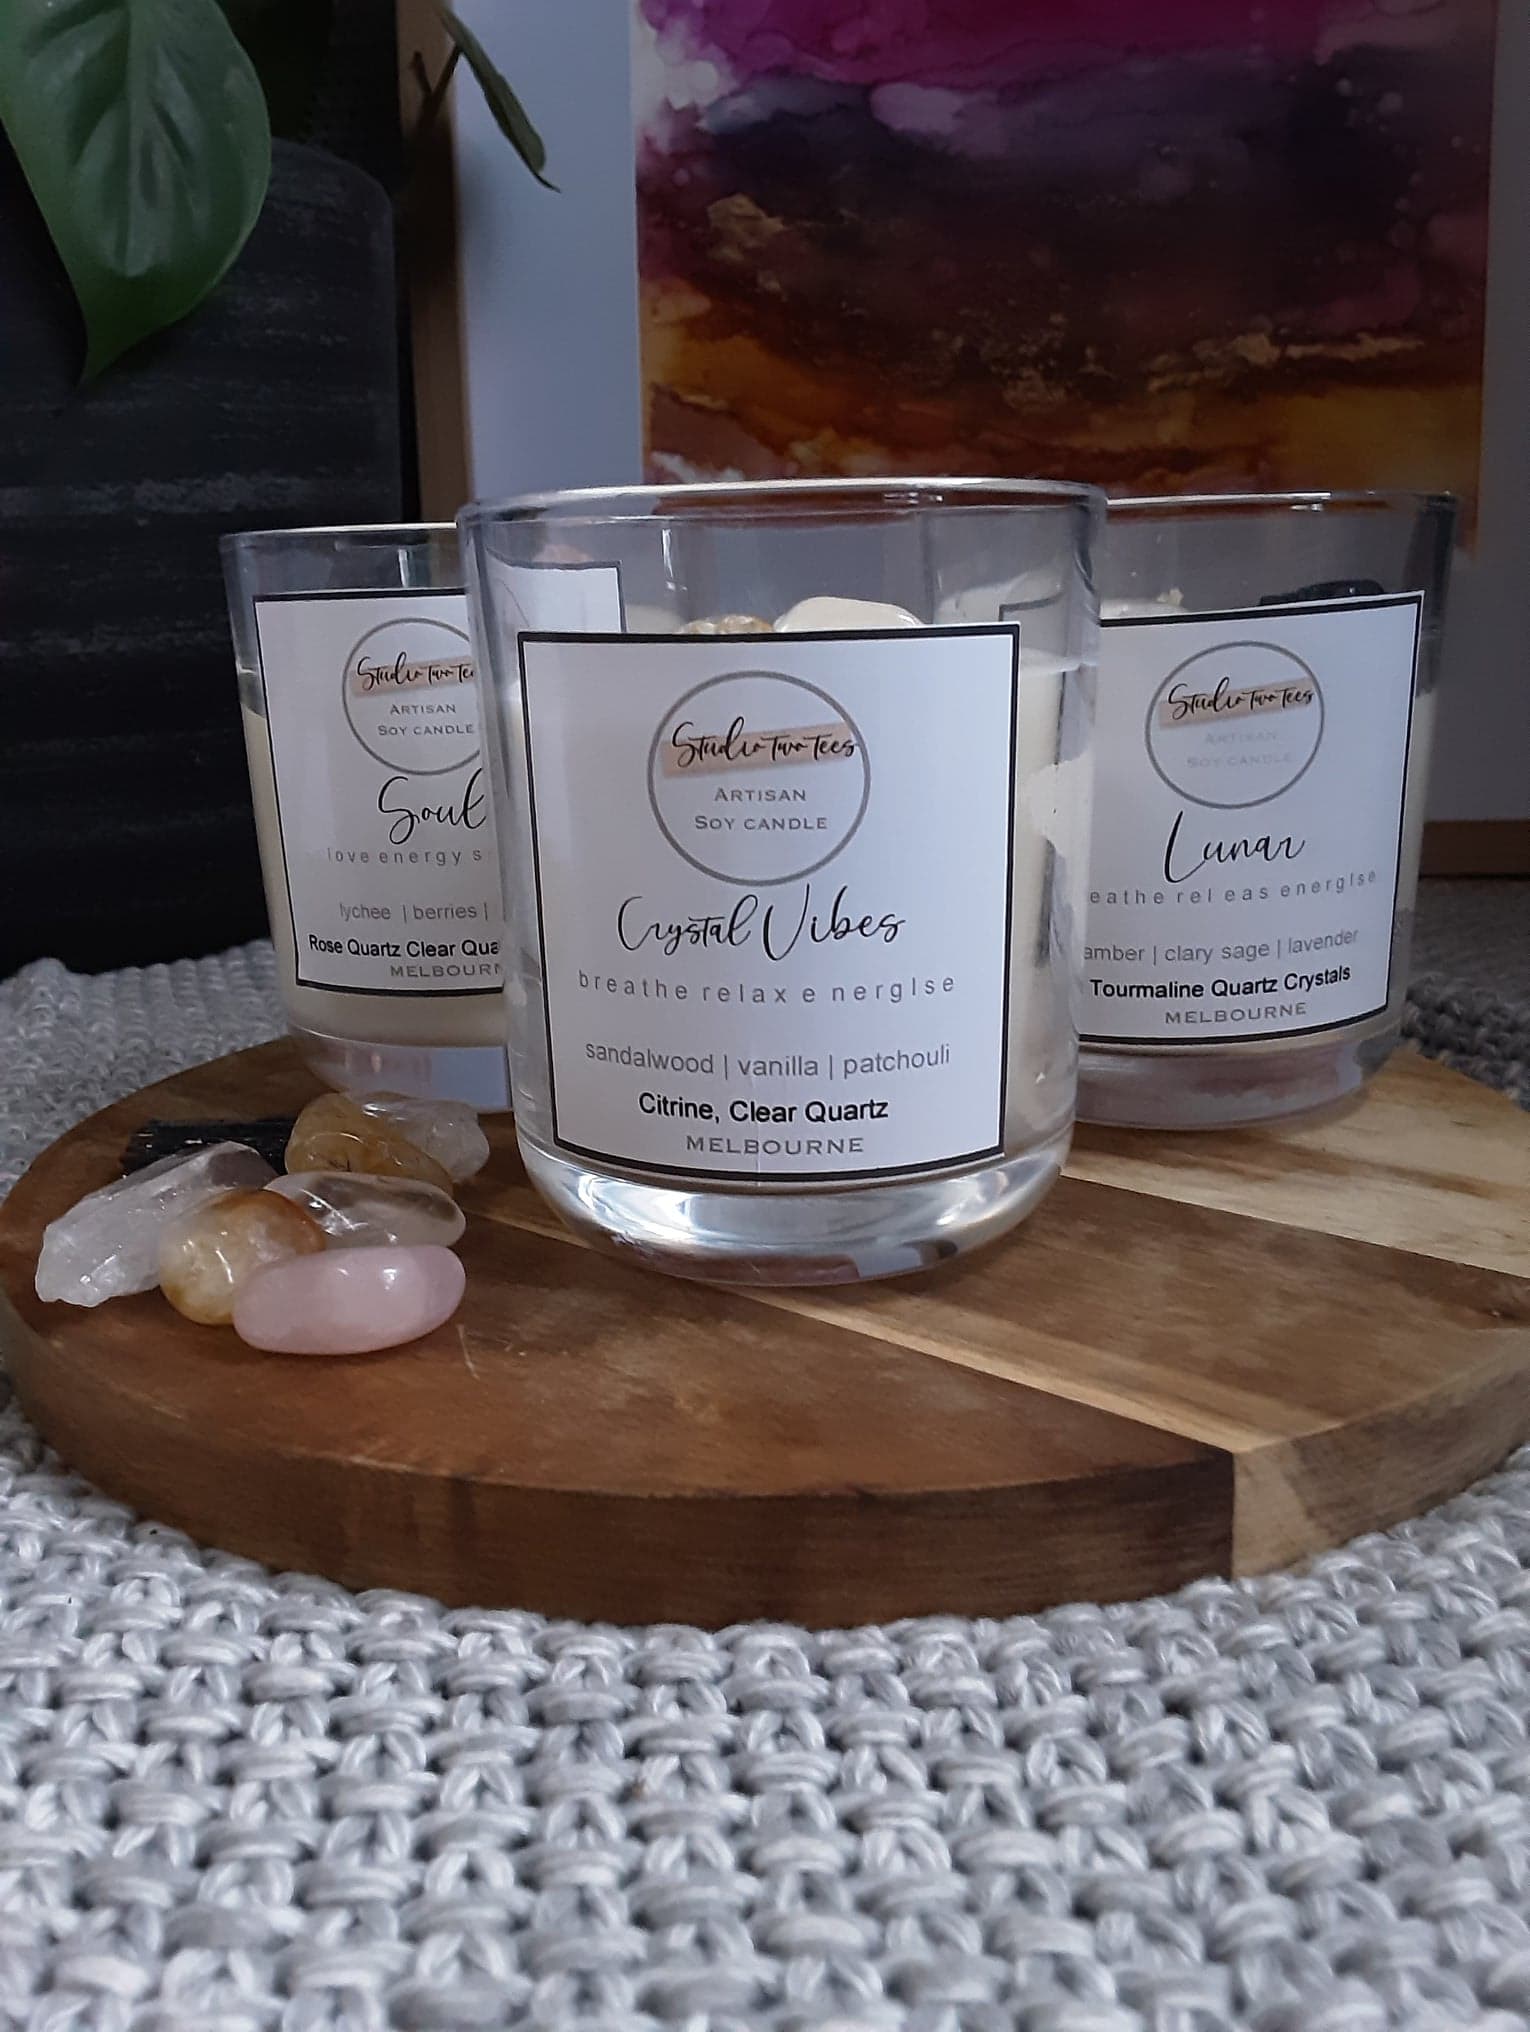 SOUL CRYSTAL SOY CANDLE